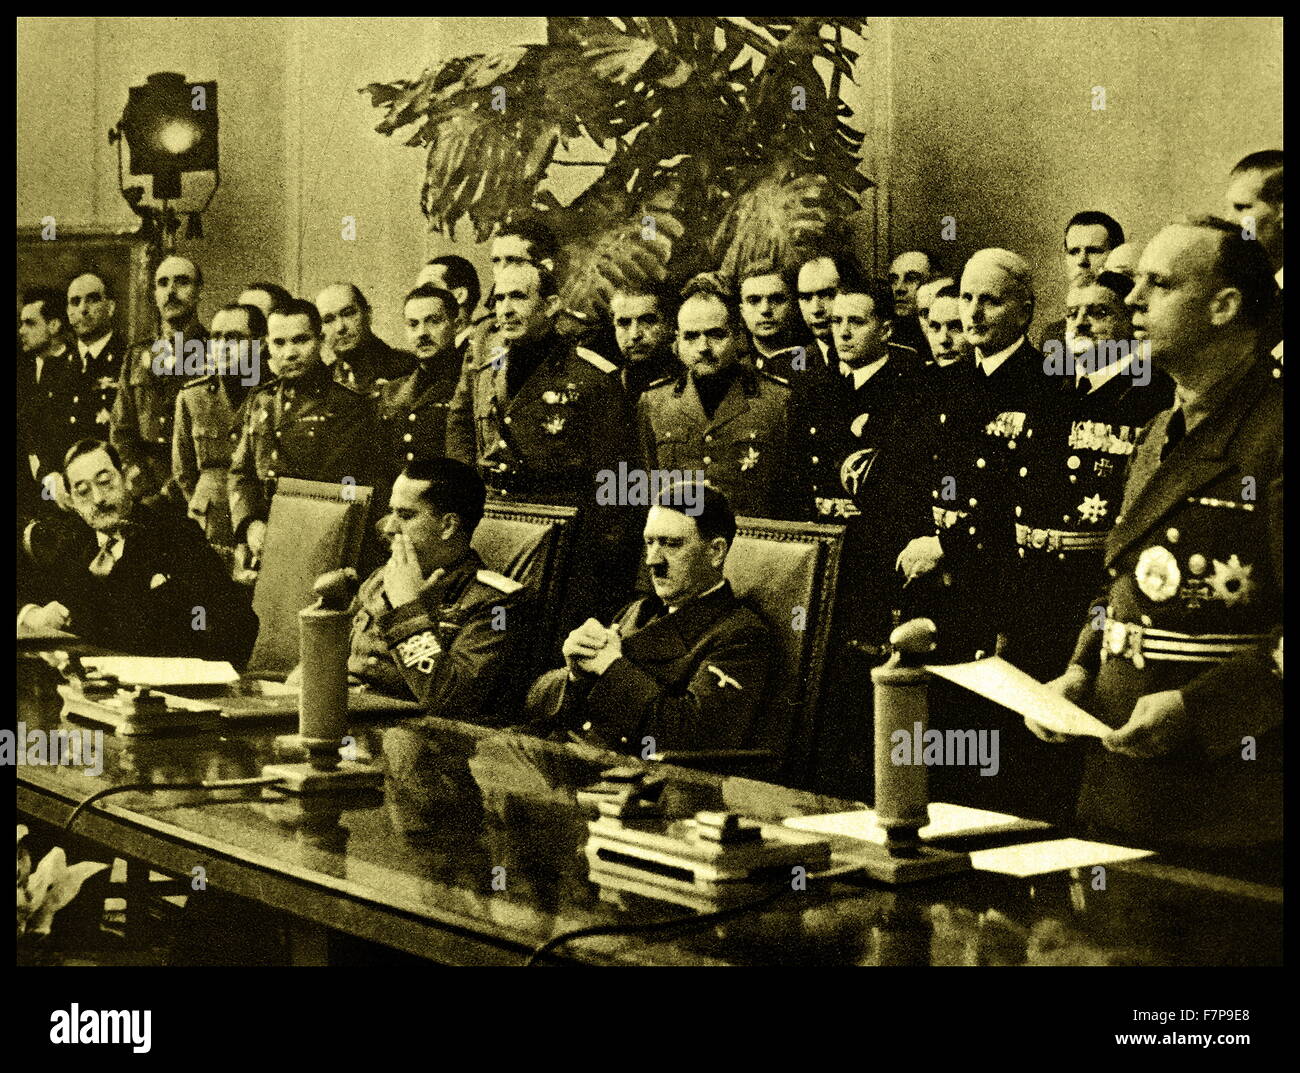 A statement from the Reich Governament following the signing of the Tripartite Pact (Berlin Pact) First row left to right: Ambassador Kurusu, Count Ciano and Adolf Hitler. Dated 27th September 1940. Stock Photo